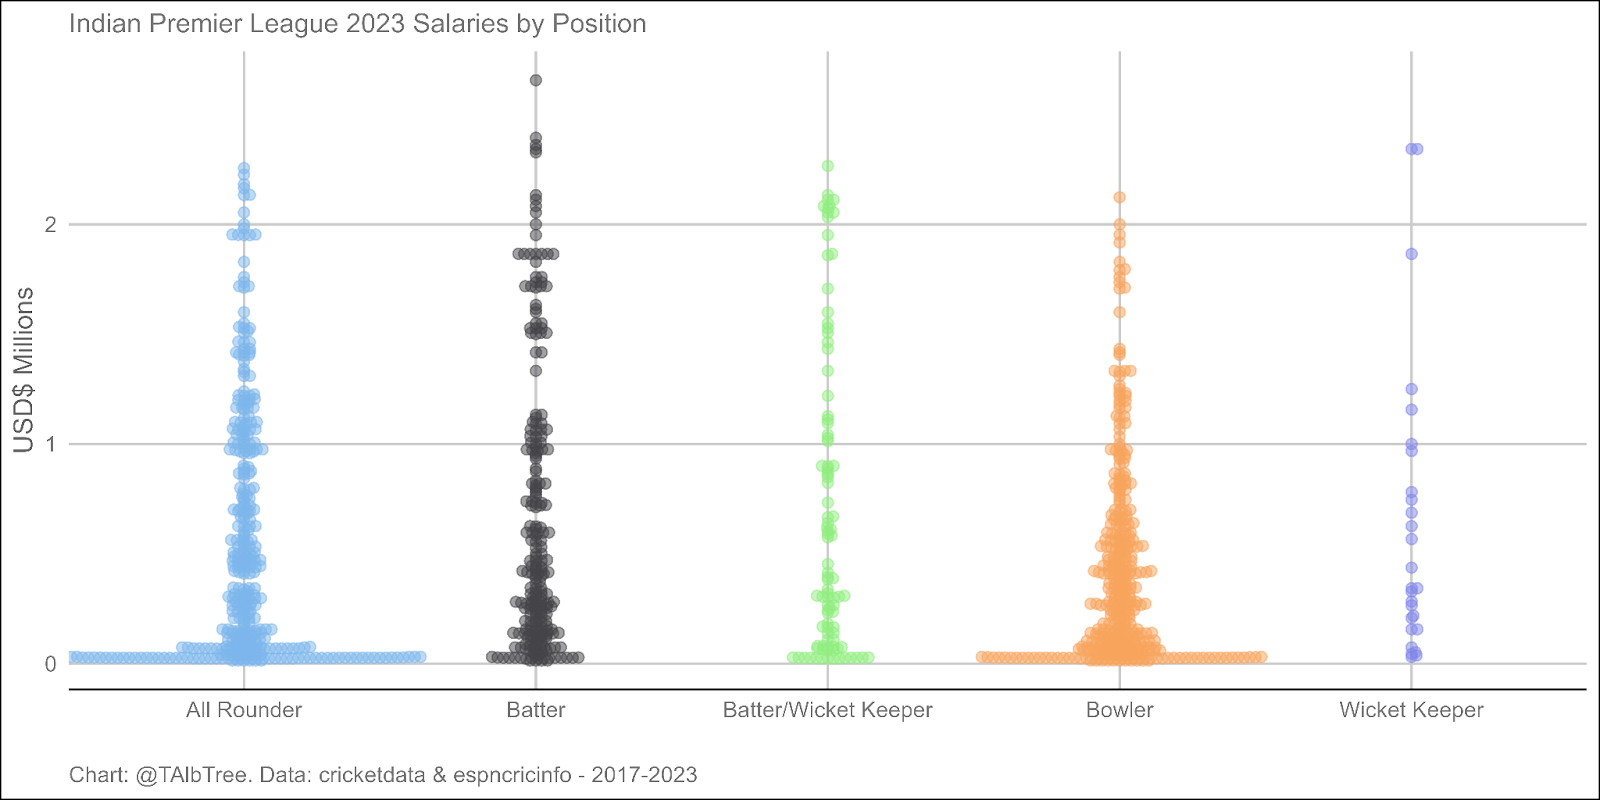 Beeswarm plot of salary amounts for the indian premier league. All Rounder and Bowlers skewed towards cheaper contracts.